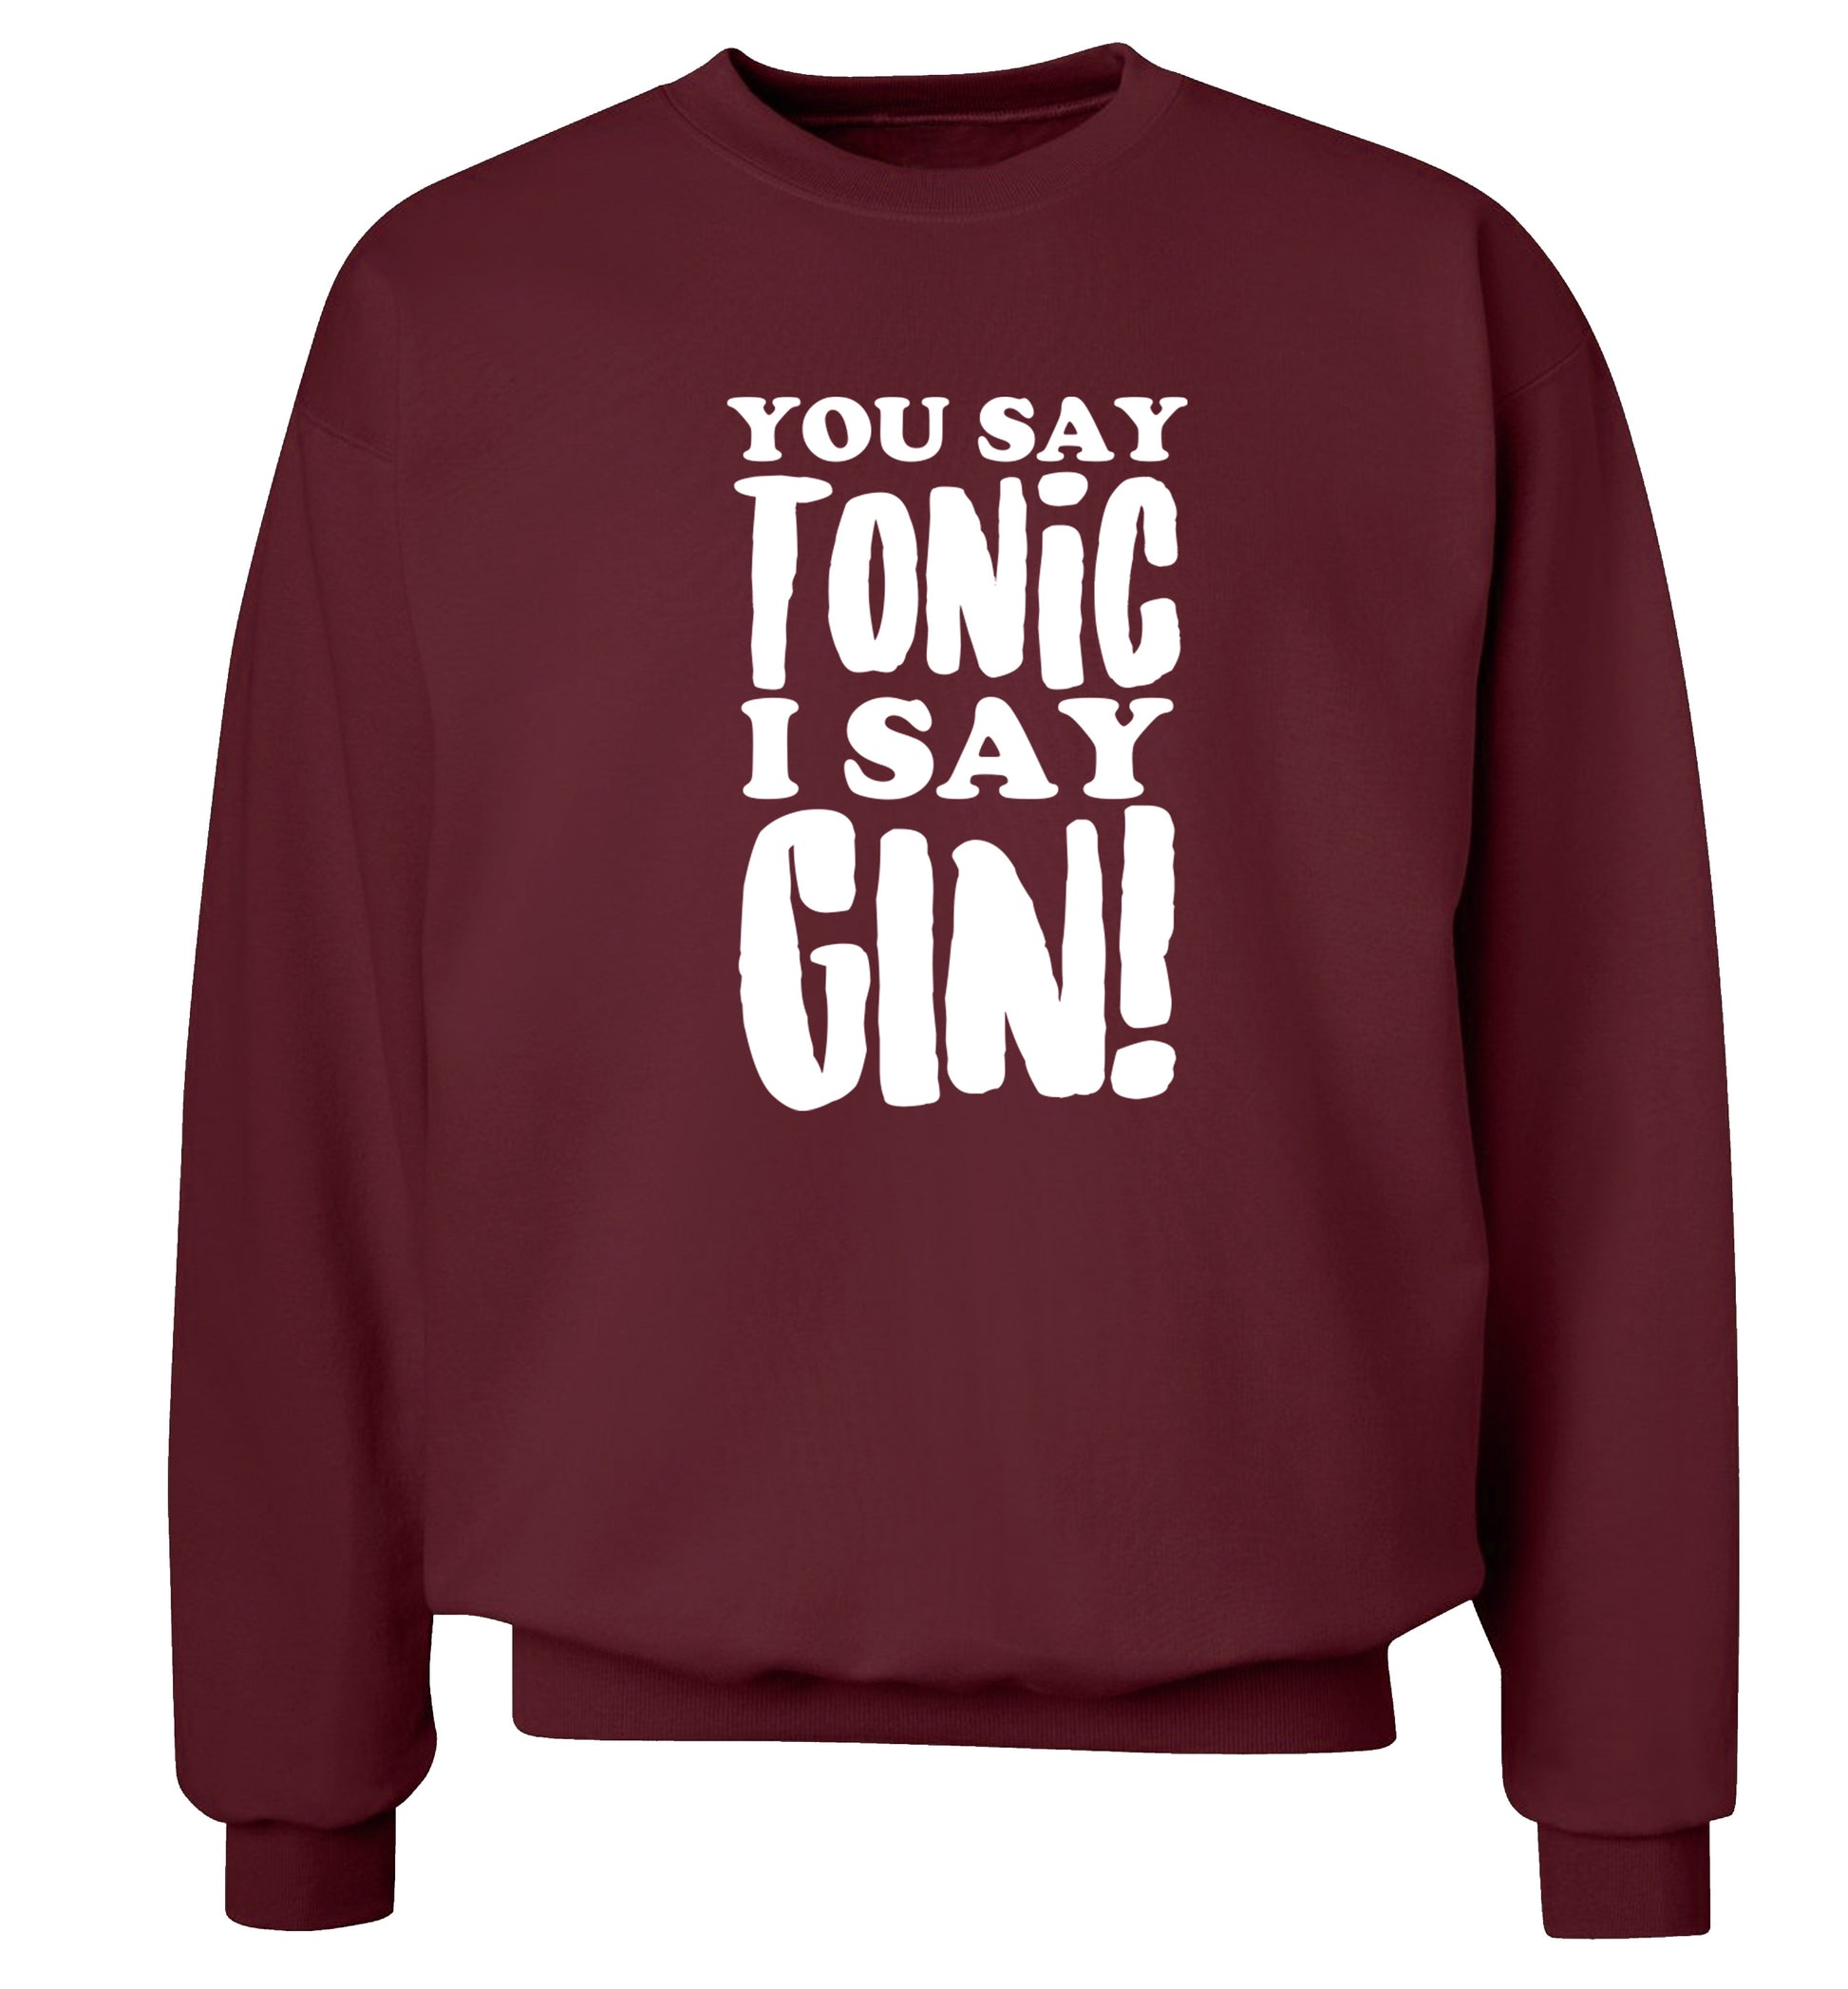 You say tonic I say gin! Adult's unisex maroon Sweater 2XL